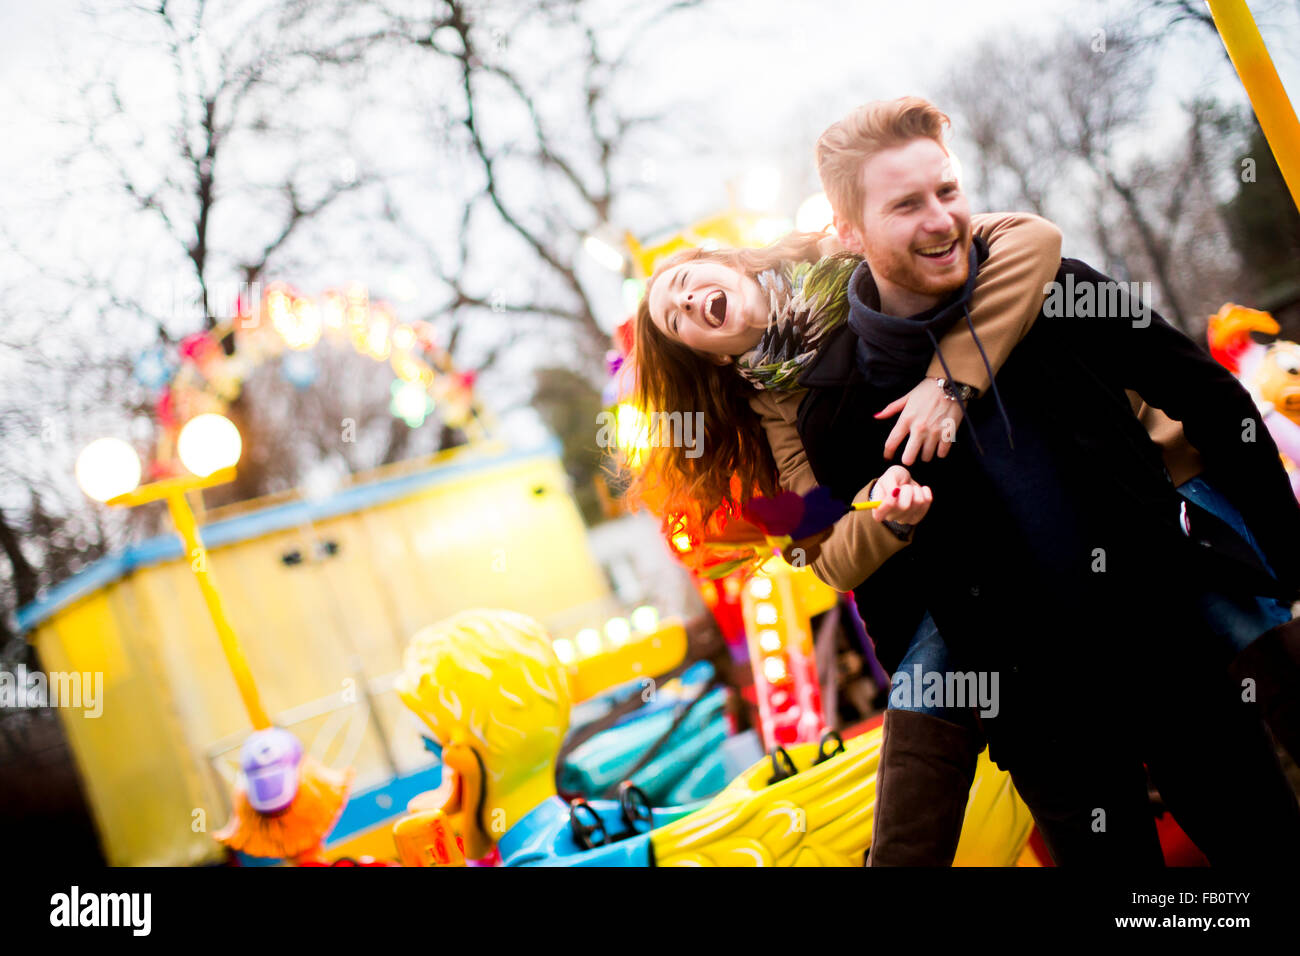 Young couple in the amusement park Stock Photo